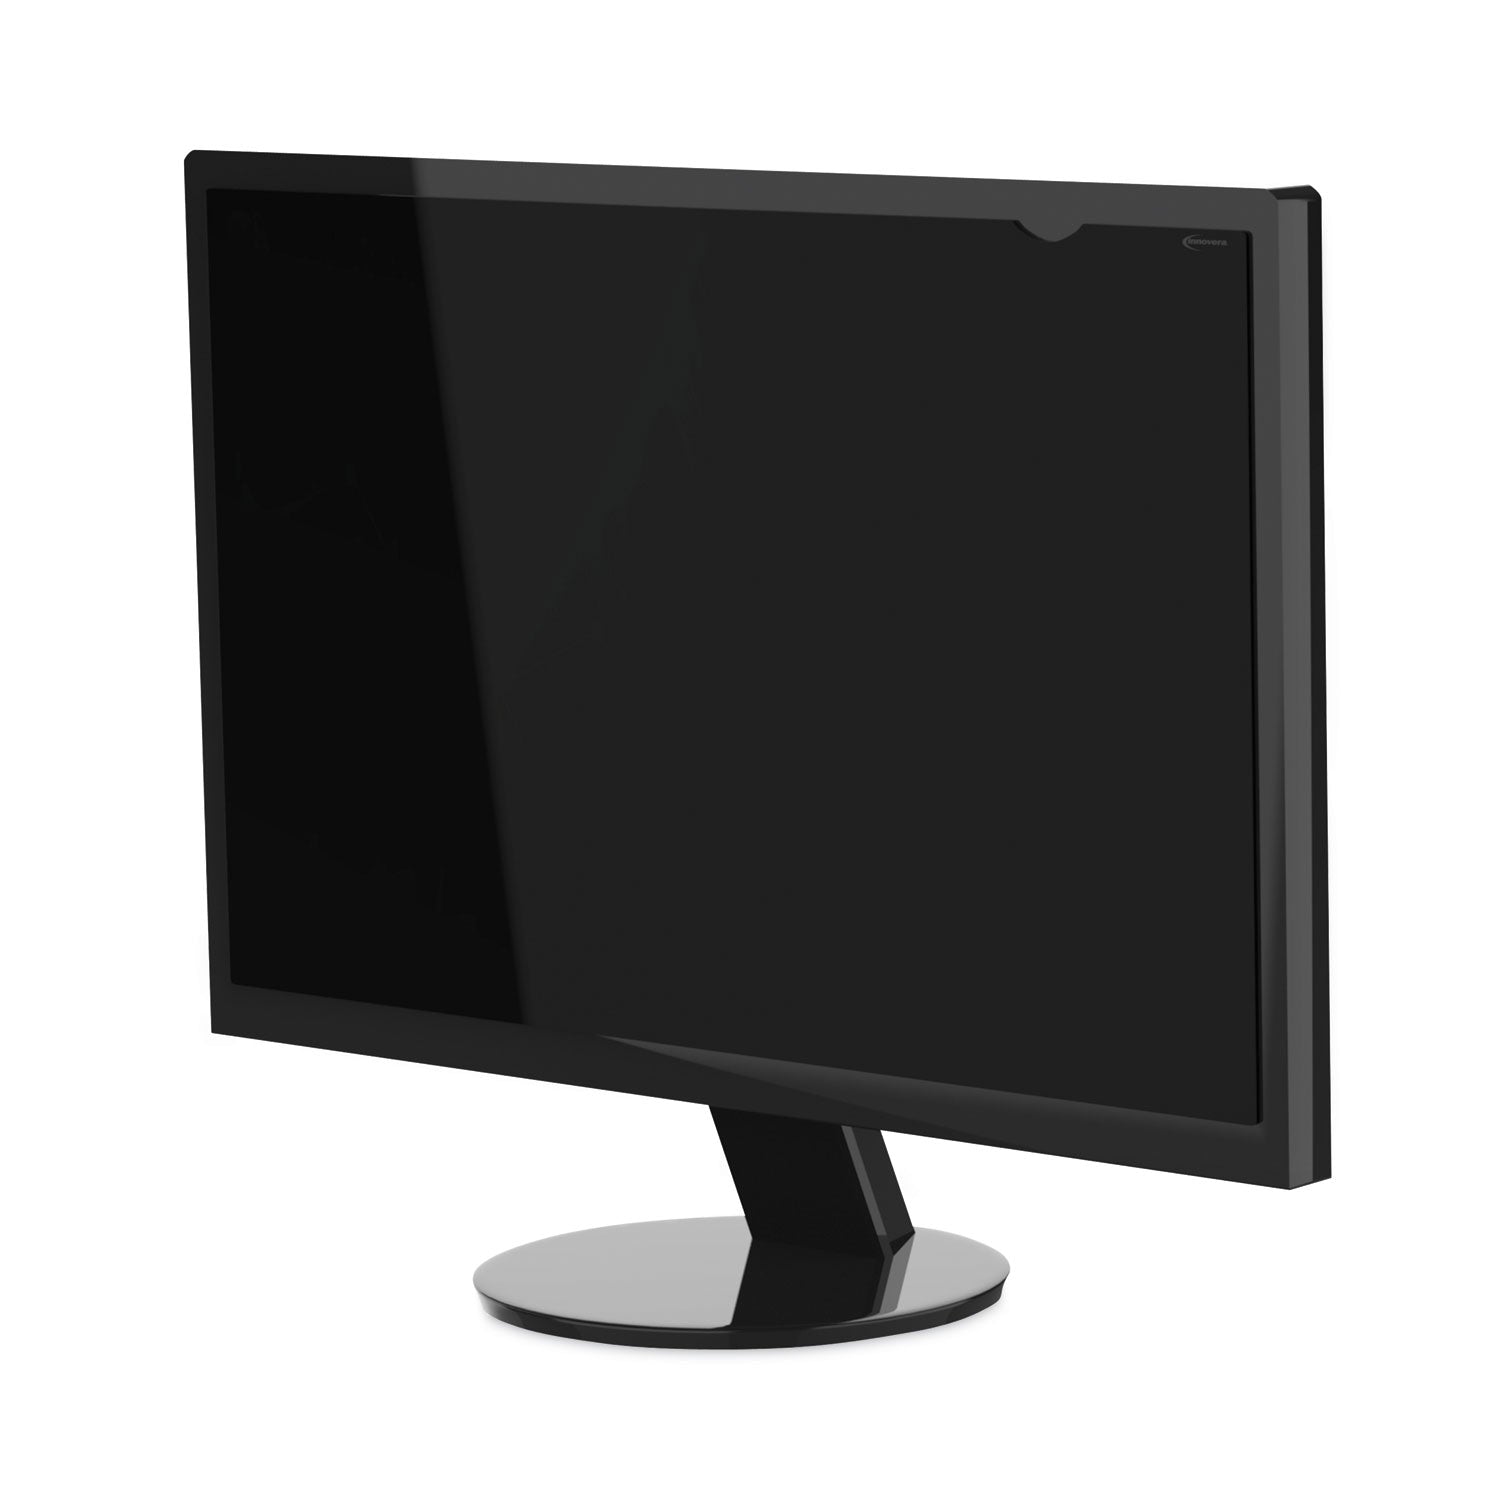 blackout-privacy-monitor-filter-for-201-widescreen-flat-panel-monitor-1610-aspect-ratio_ivrblf201w - 5